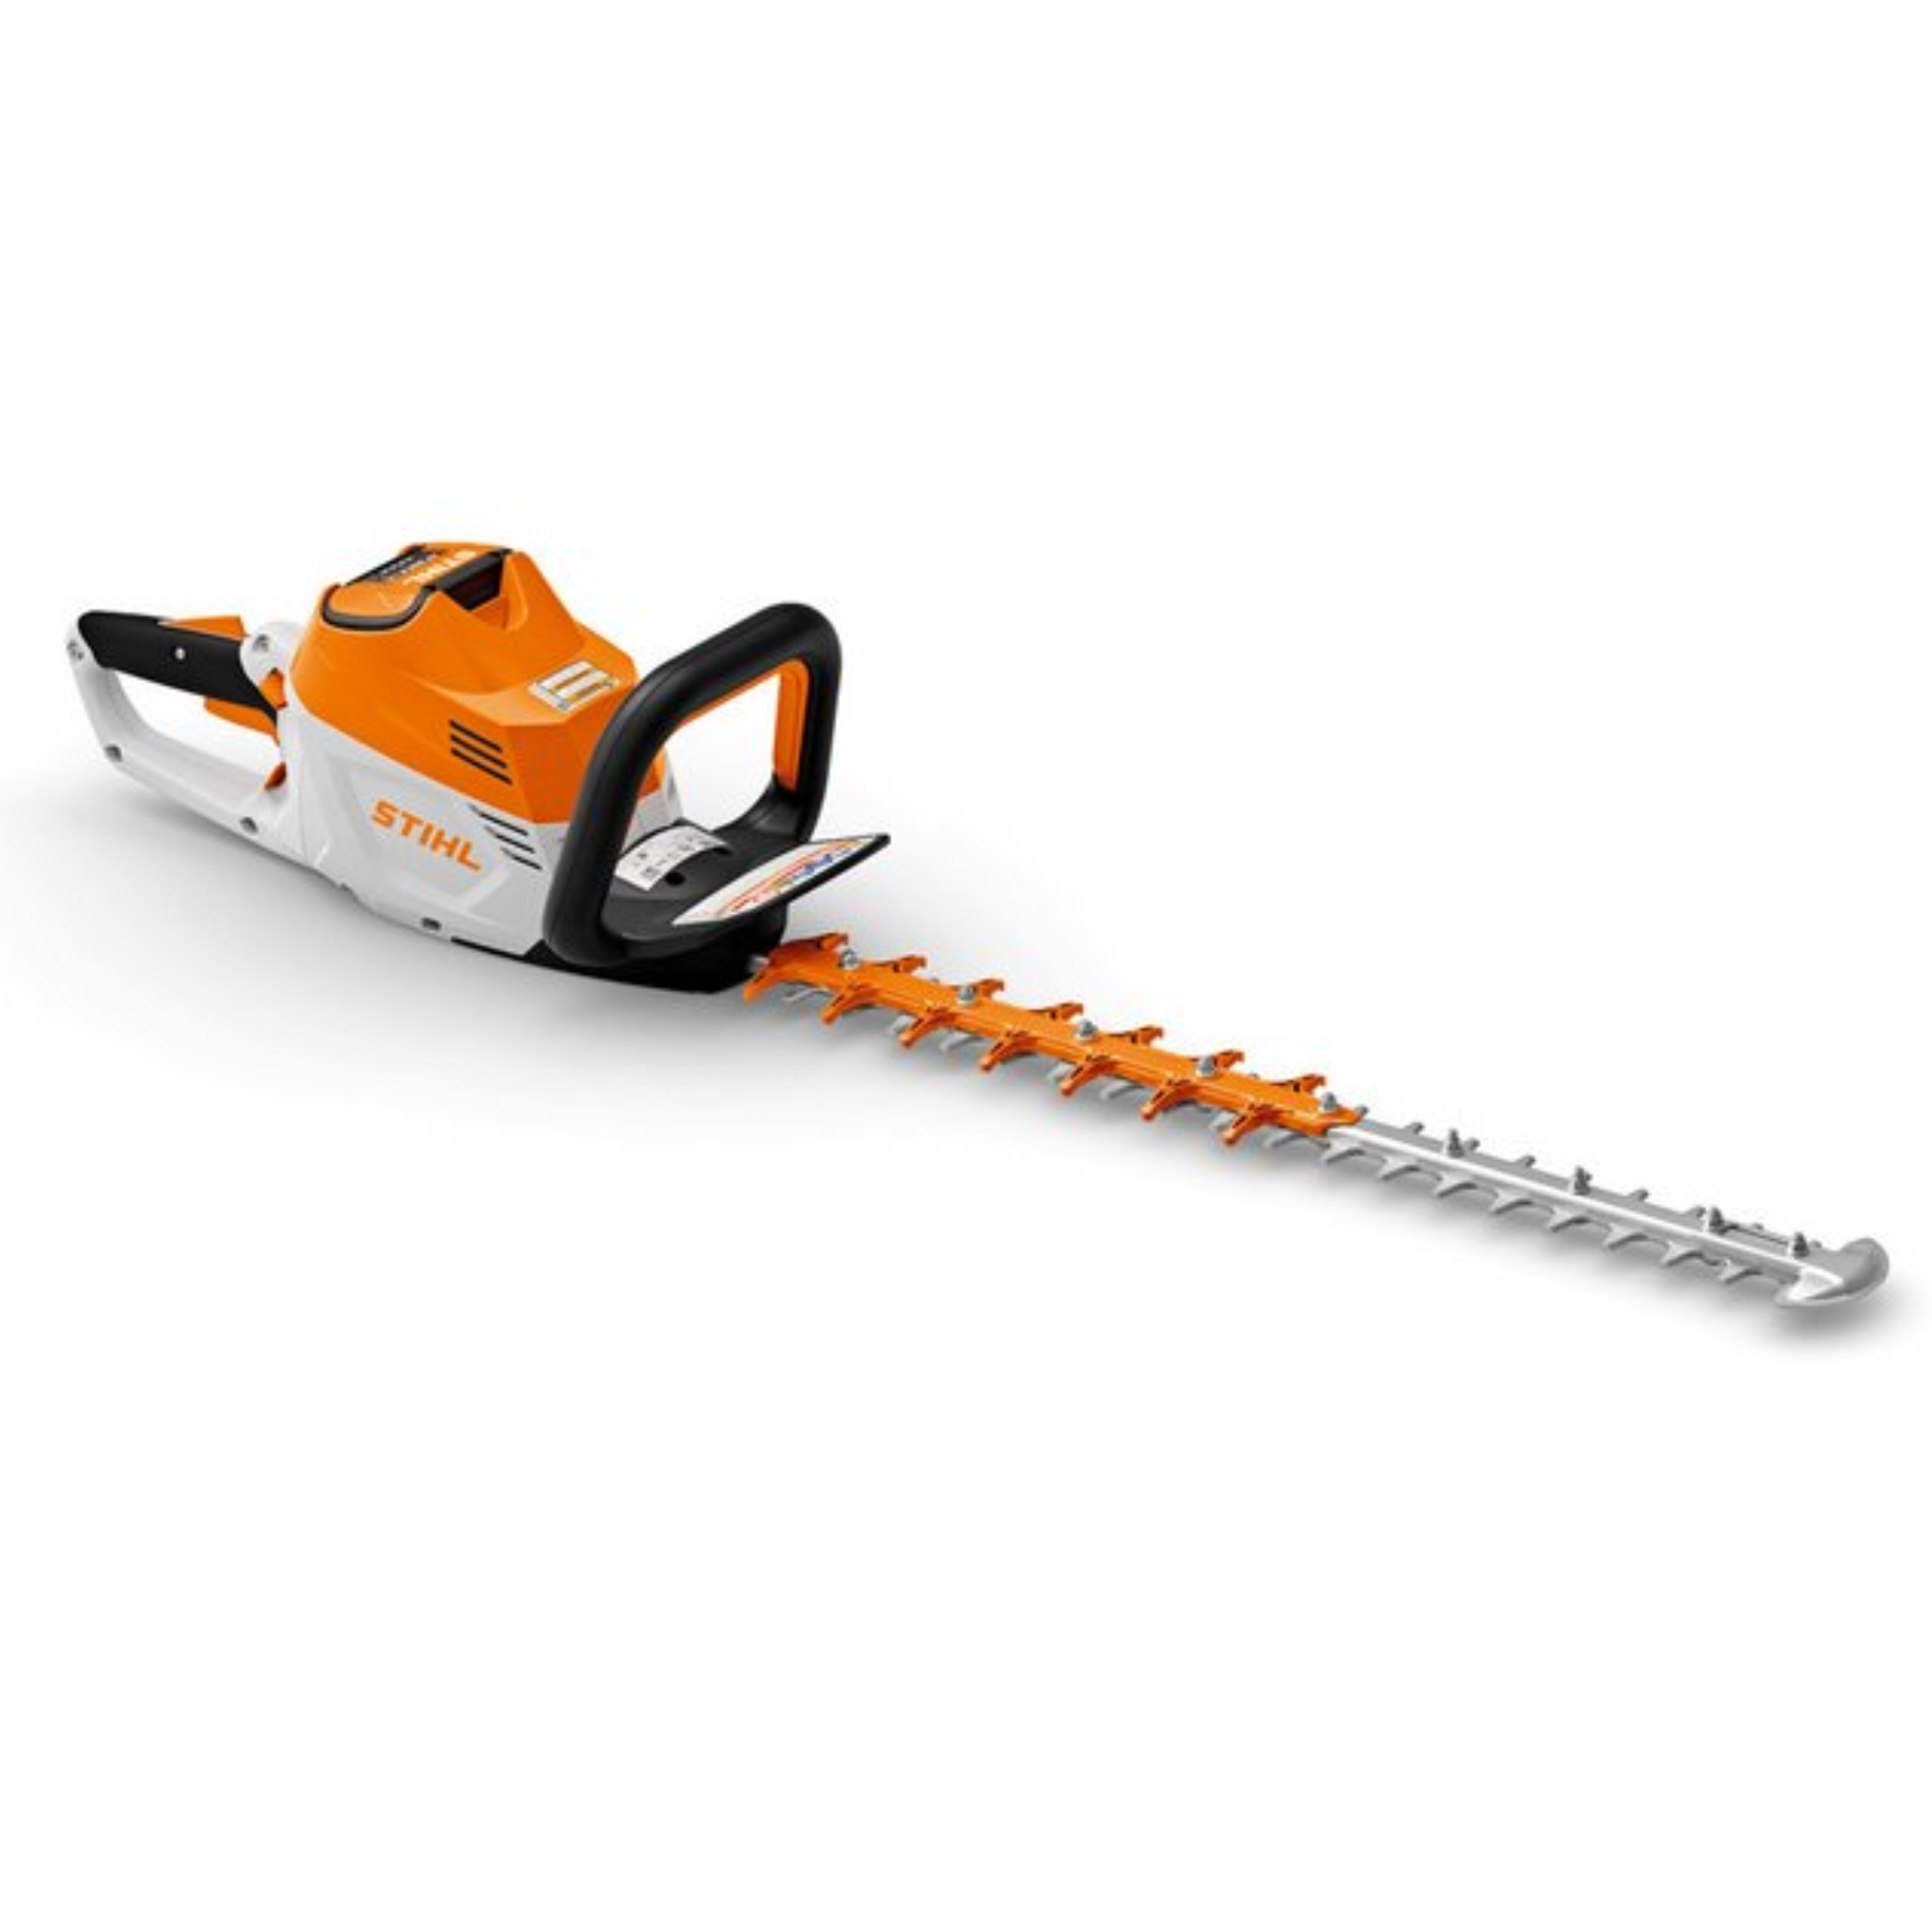 Stihl Commercial Grade HSA 100 Hedge Trimmer - Tool Only